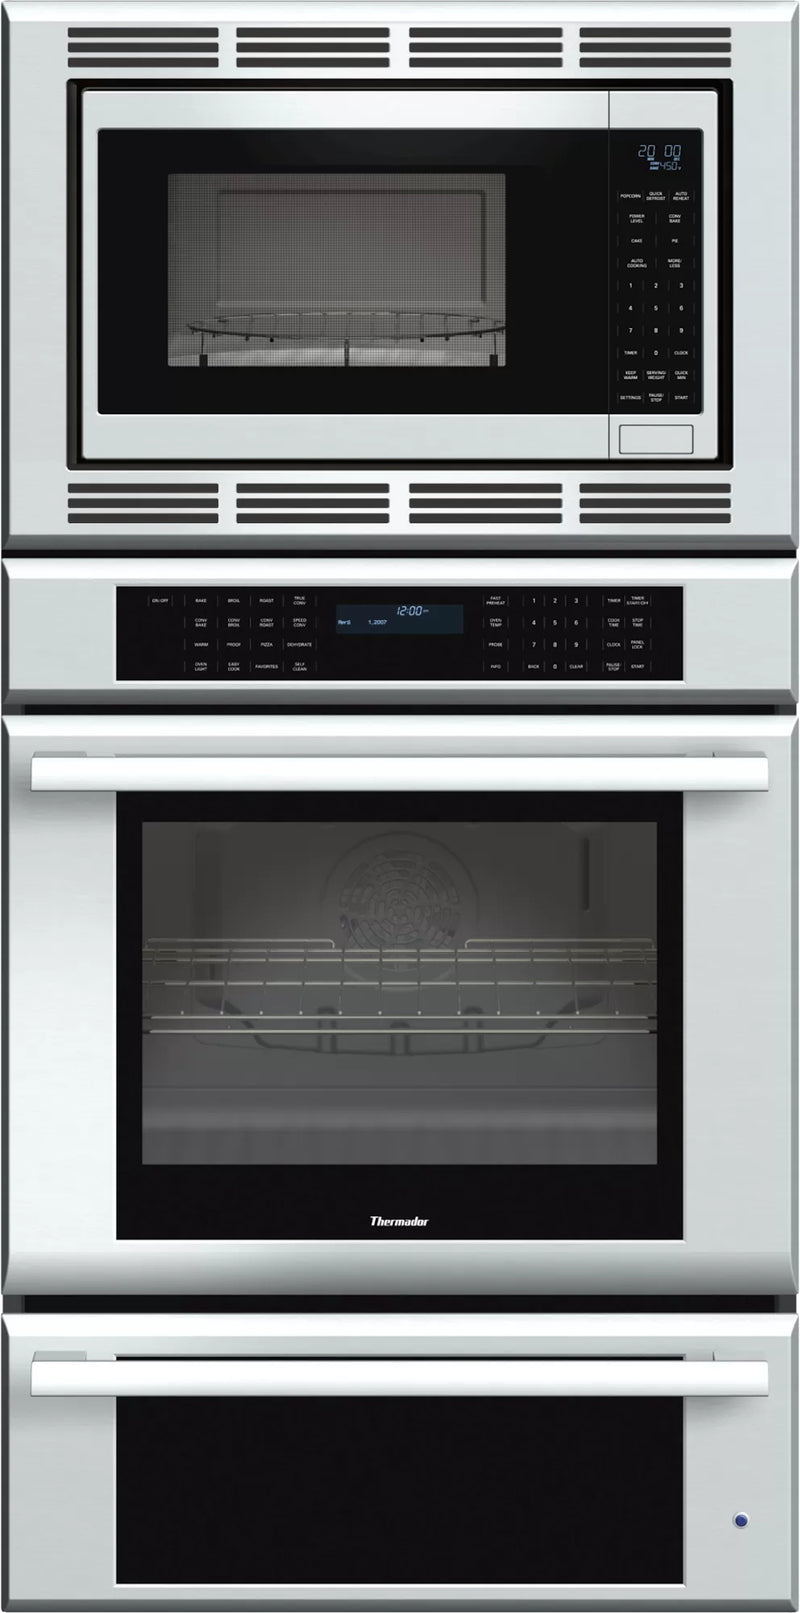 Thermador - 4.7 cu. ft Double Wall Oven in Stainless - MEDMCW31JS